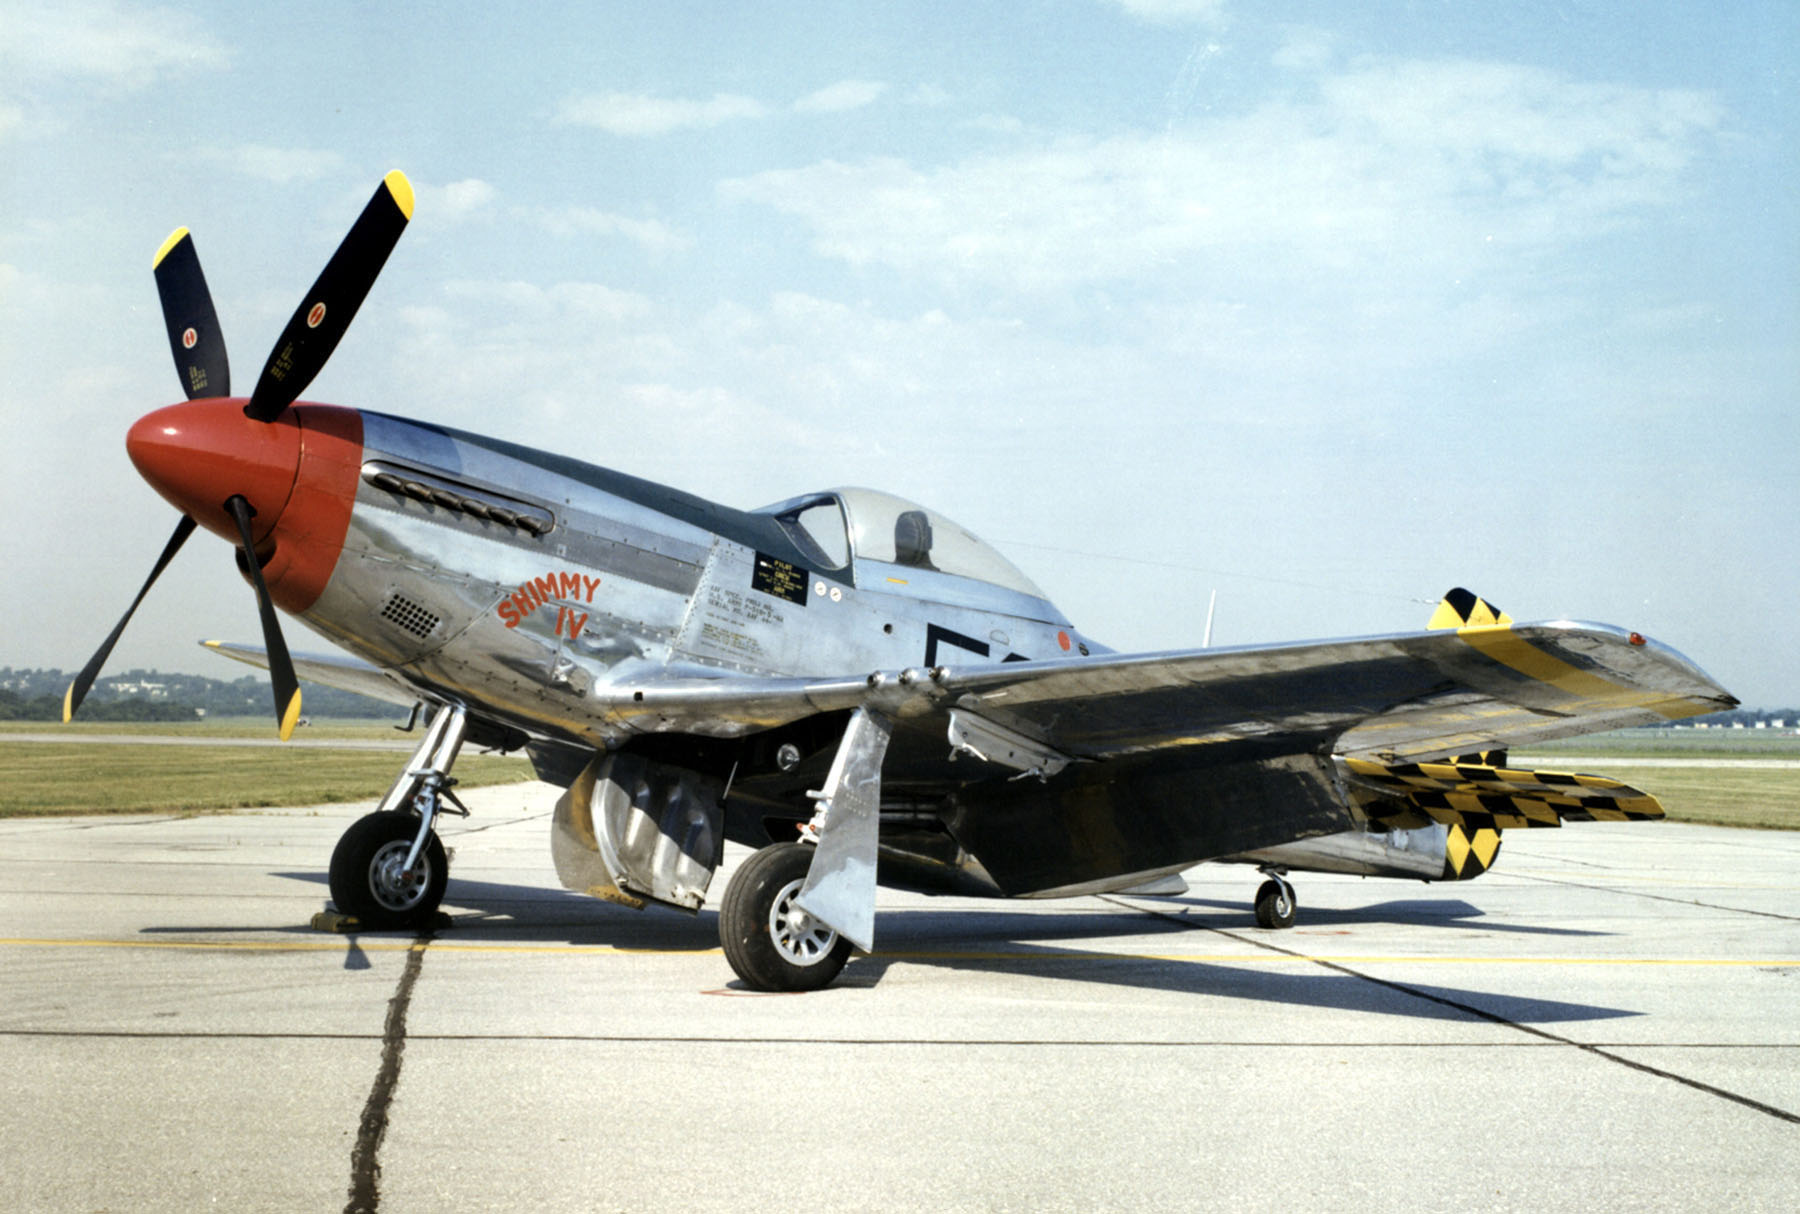 North American Aviation P-51D-30-NA Mustang, 44-74936, marked as P-51D-15-NA 44-15174, at the National Museum of the United States Air Force. (U.S. Air Force)